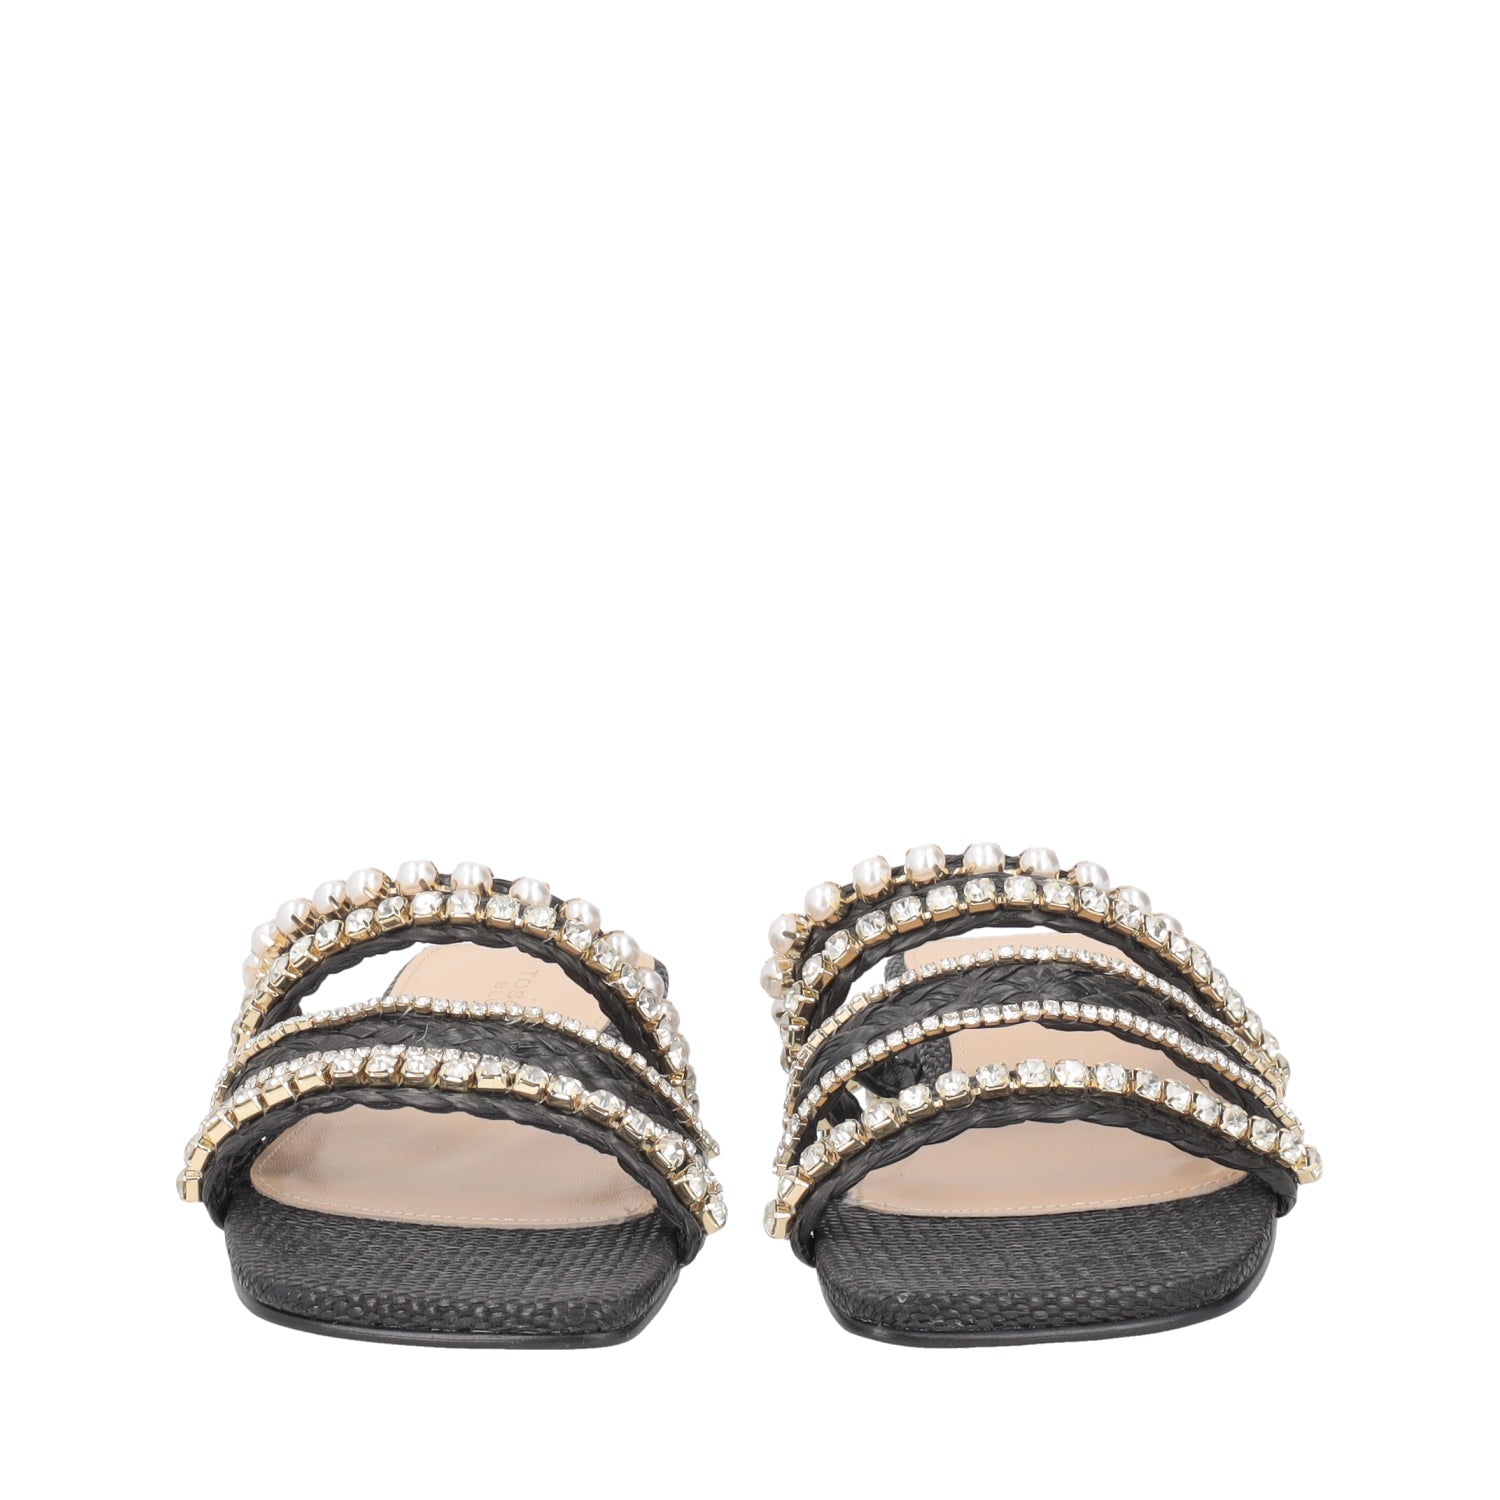 BLACK FRIDA SLIPPERS WITH RHINESTONES AND PEARLS